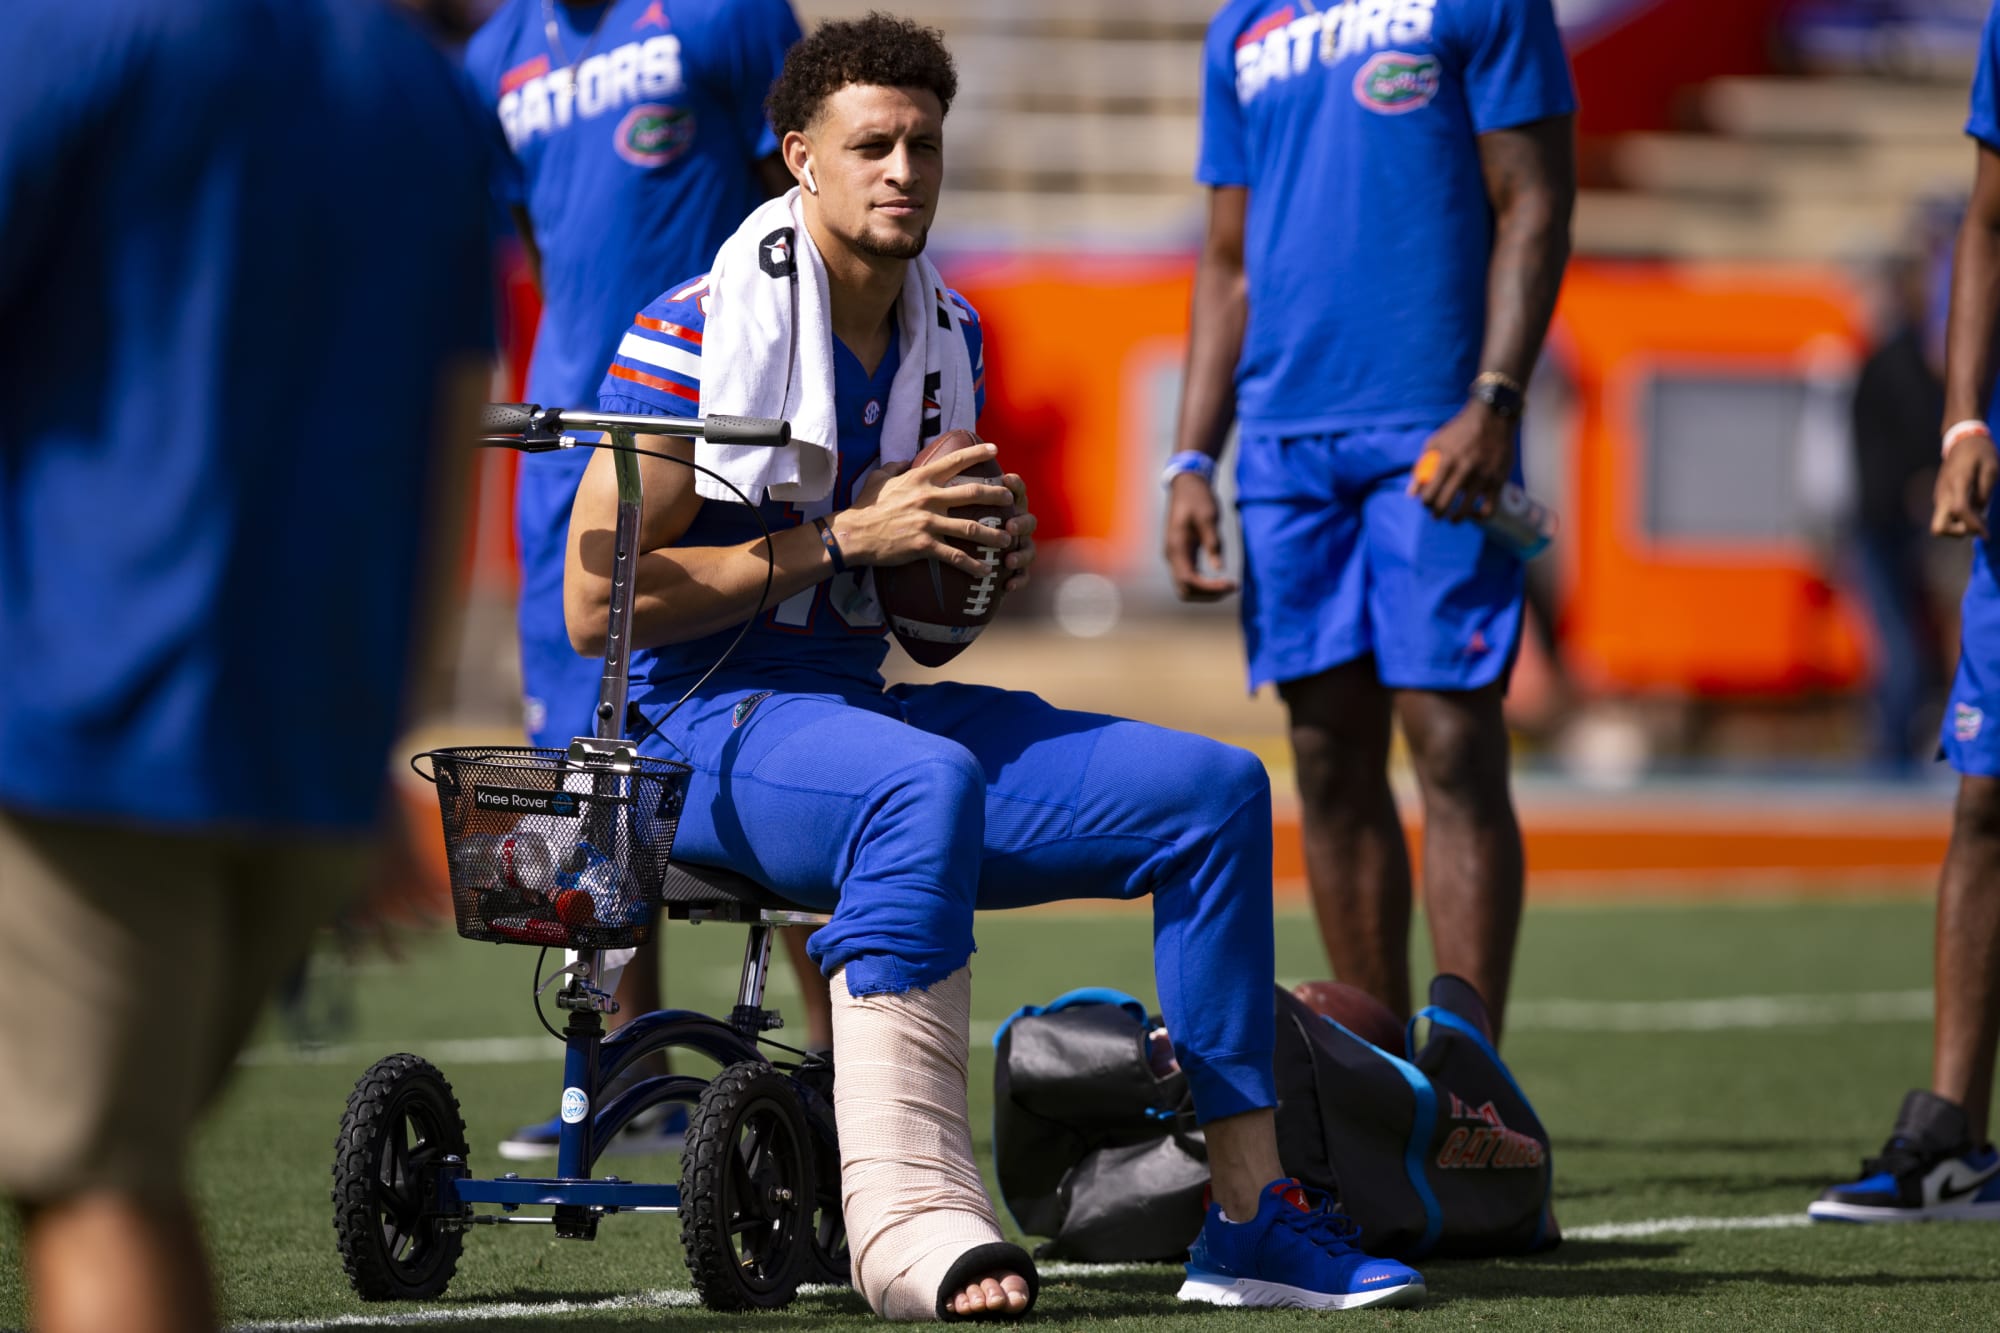 Florida football Gators' injury report against the Towson Tigers